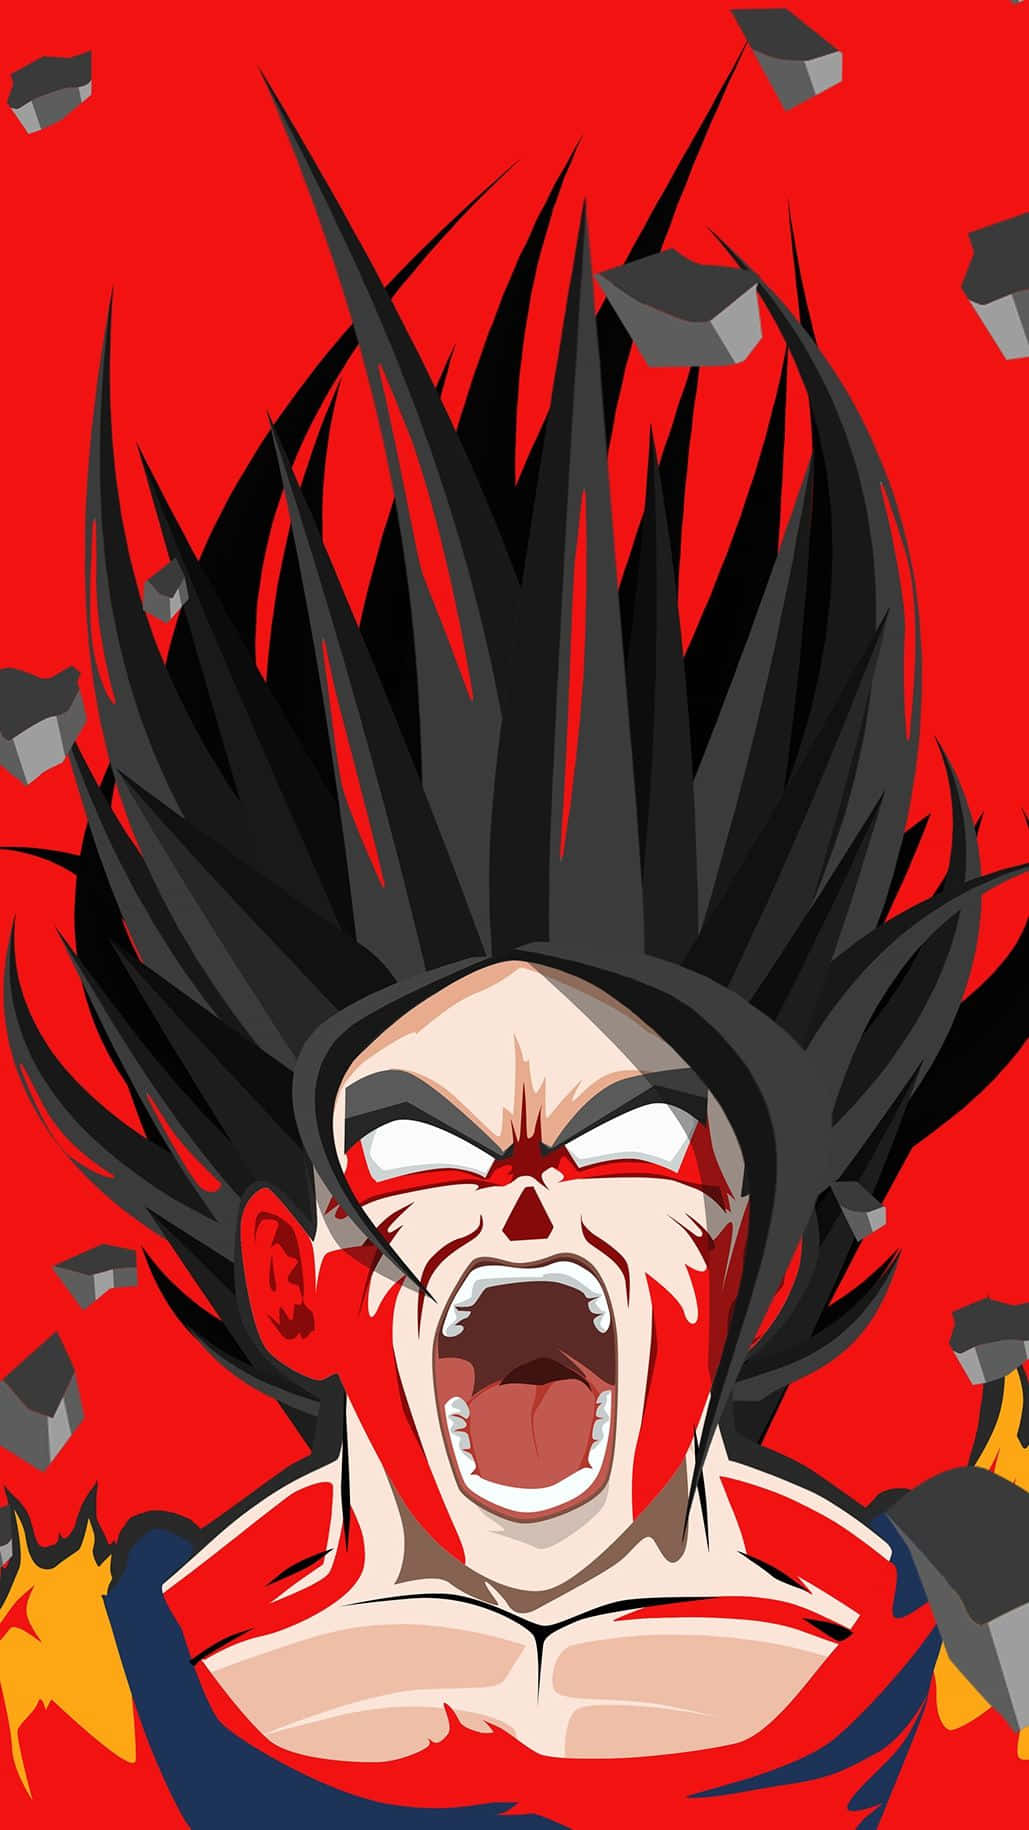 "Angry Goku Ready to Unleash His Power" Wallpaper